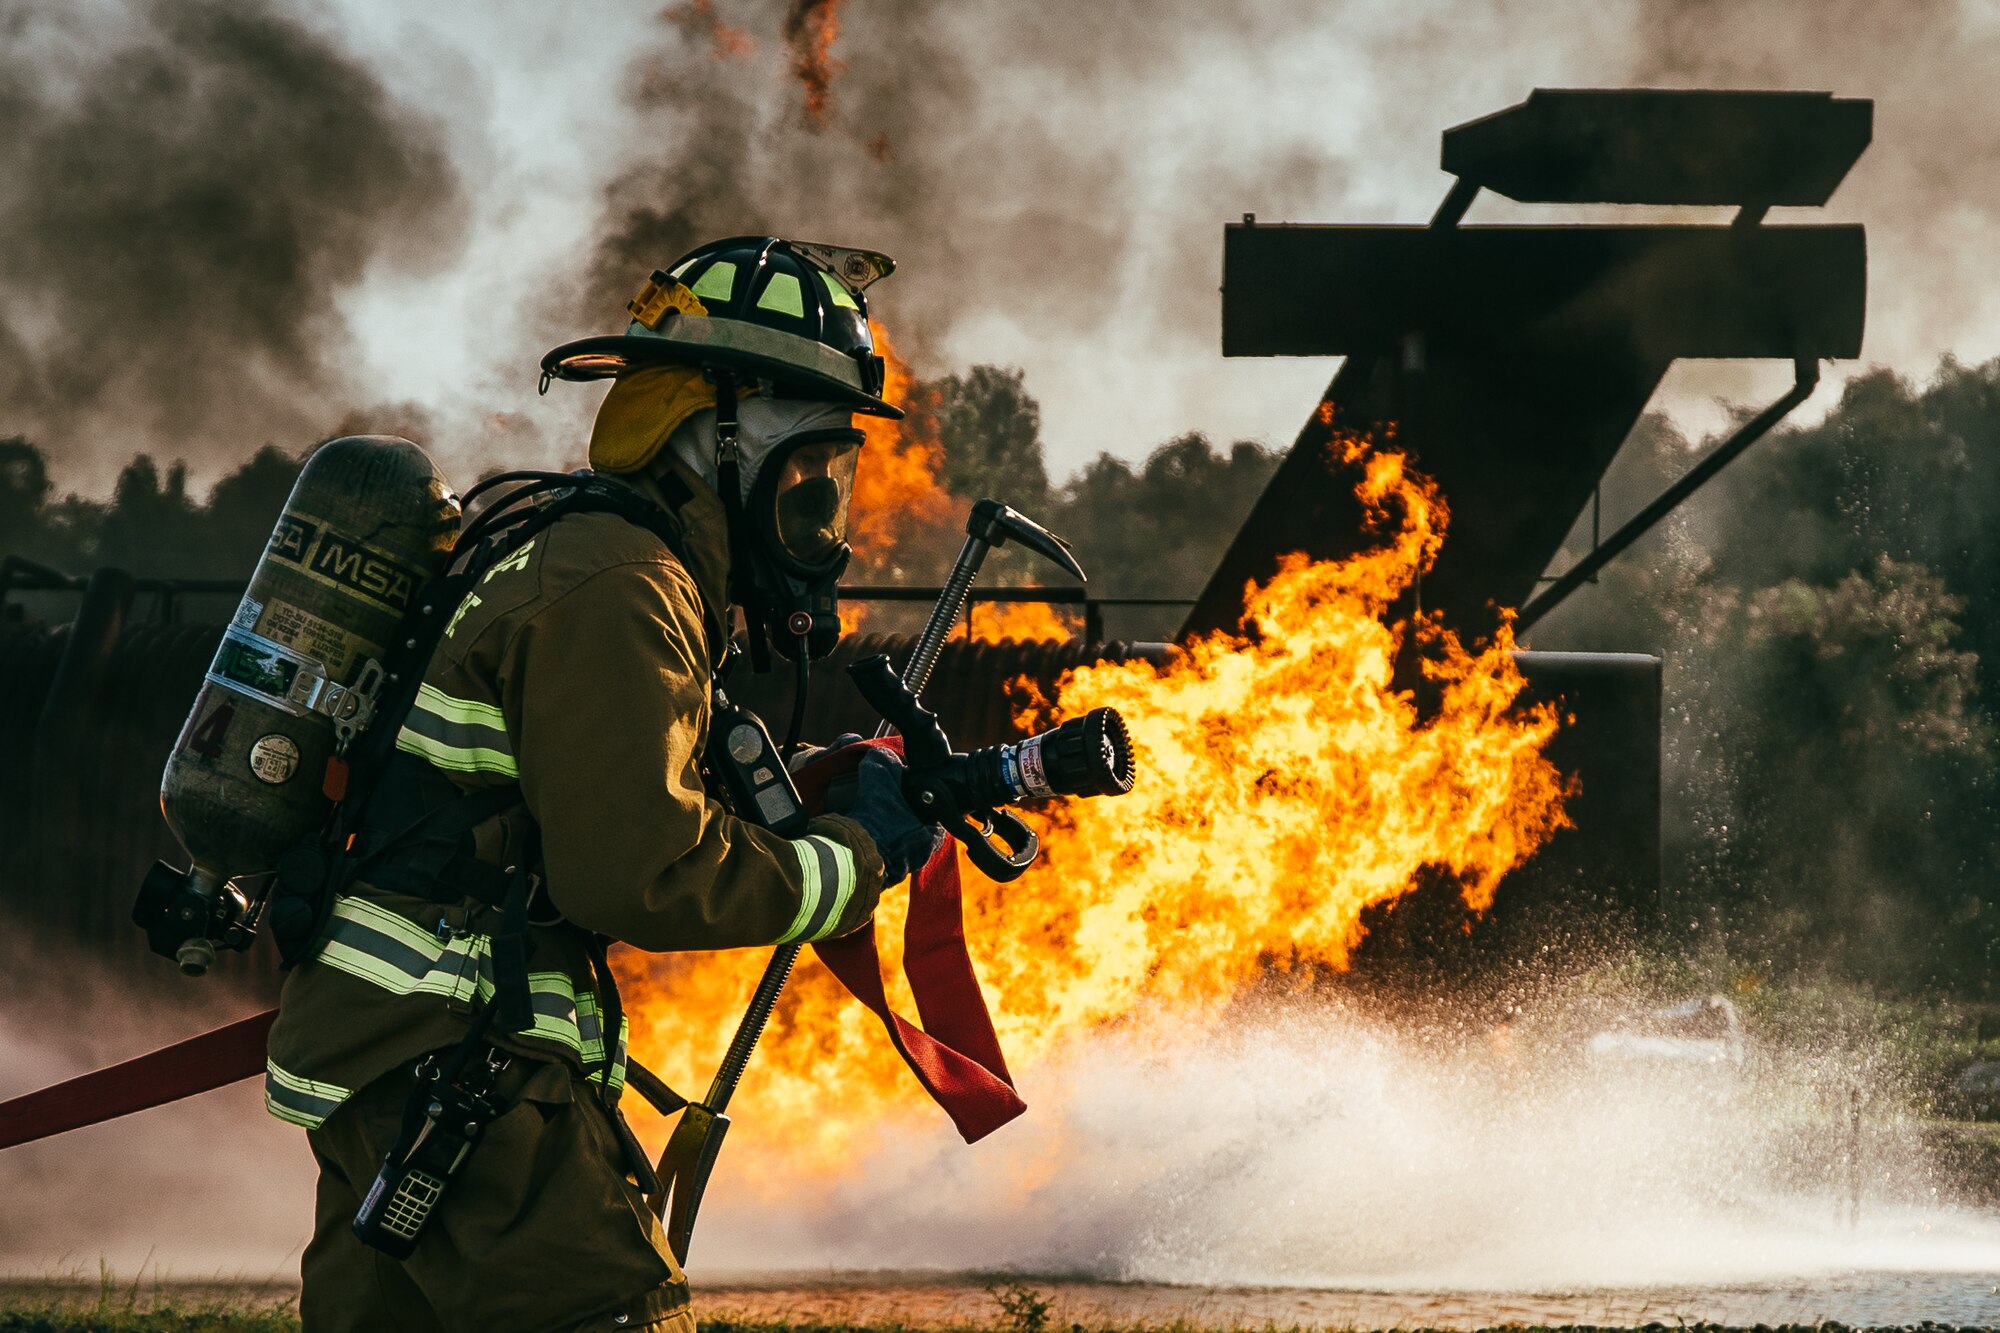 Senior Airman William Leuzinger, 11th Civil Engineer Squadron fire and emergency services firefighter, pulls a fire hose toward a simulated aircraft fire during a training exercise at Joint Base Andrews, Md., Aug. 9, 2018. During the training, firefighters were split into three teams of two, with two teams extinguishing fires and the remaining team on standby. (U.S. Air Force photo by Staff Sgt. Delano Scott)